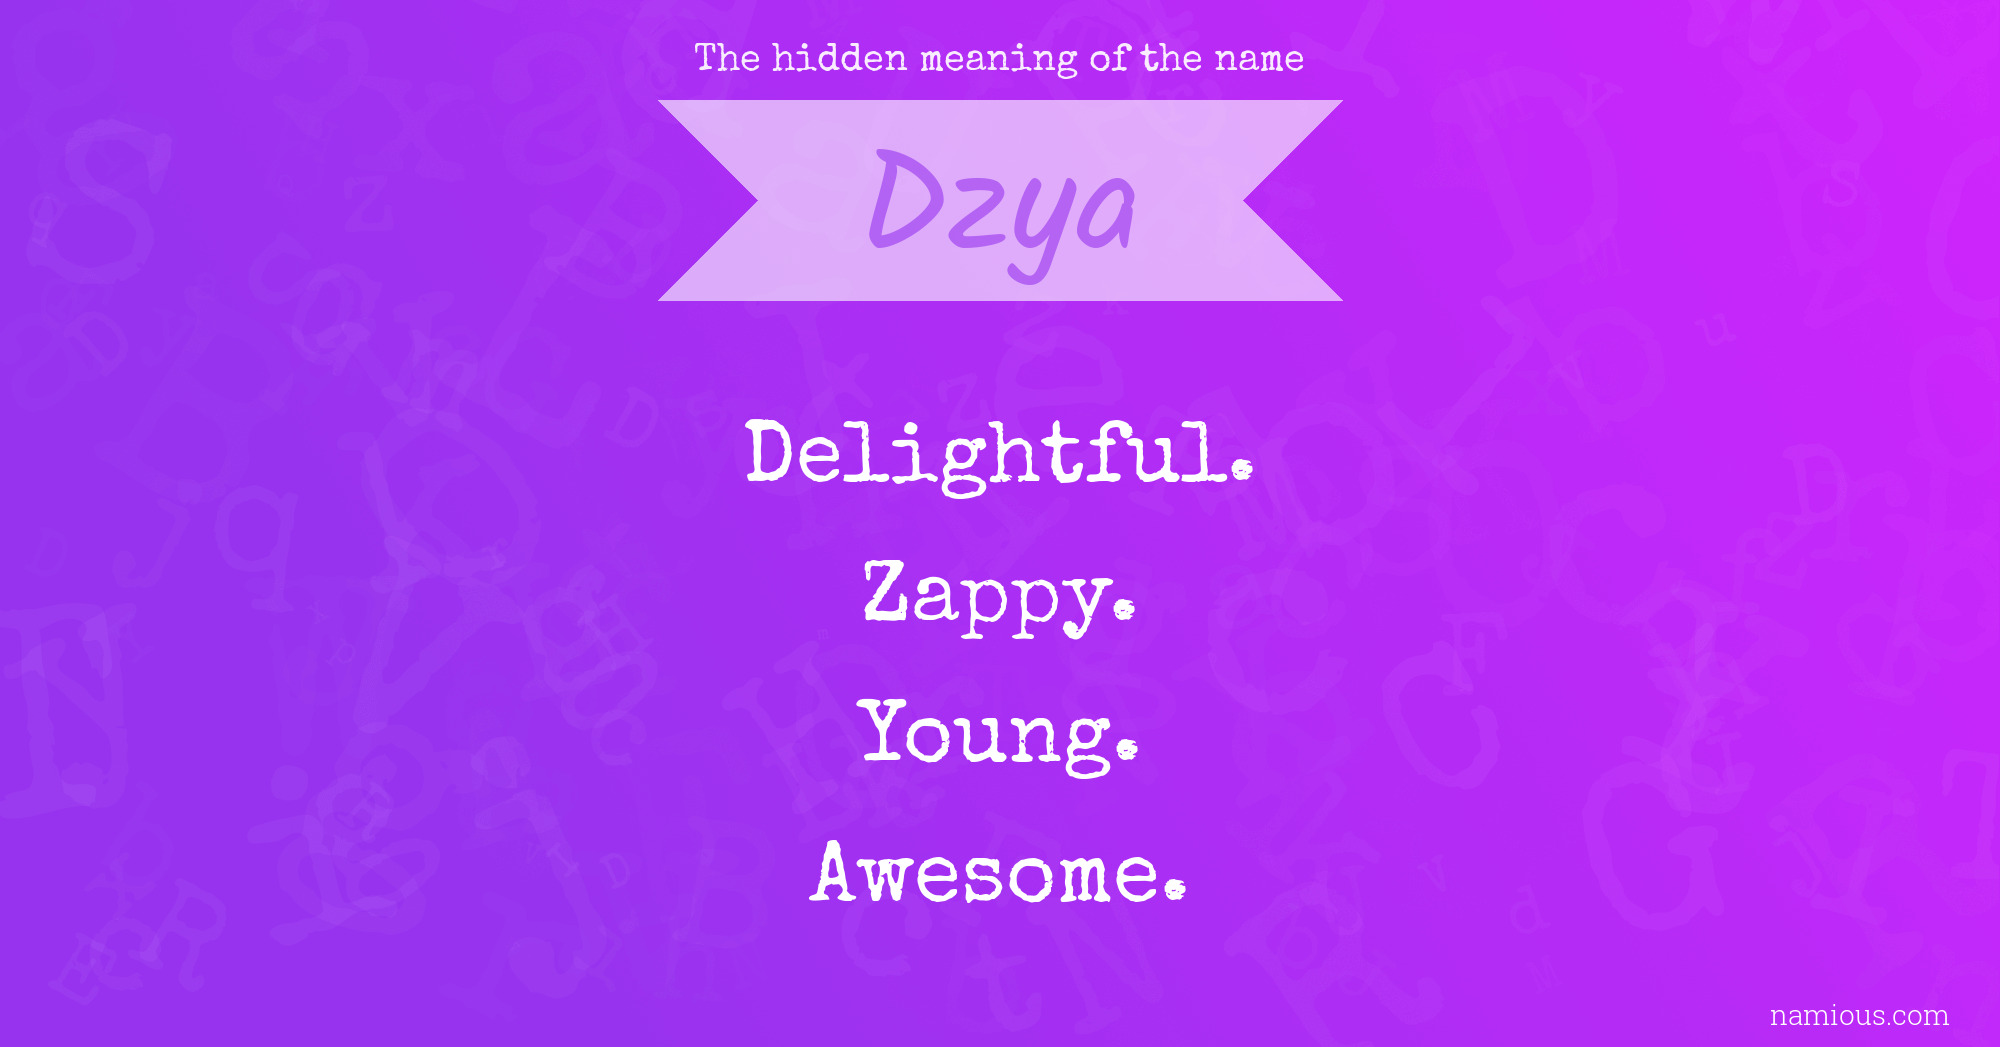 The hidden meaning of the name Dzya